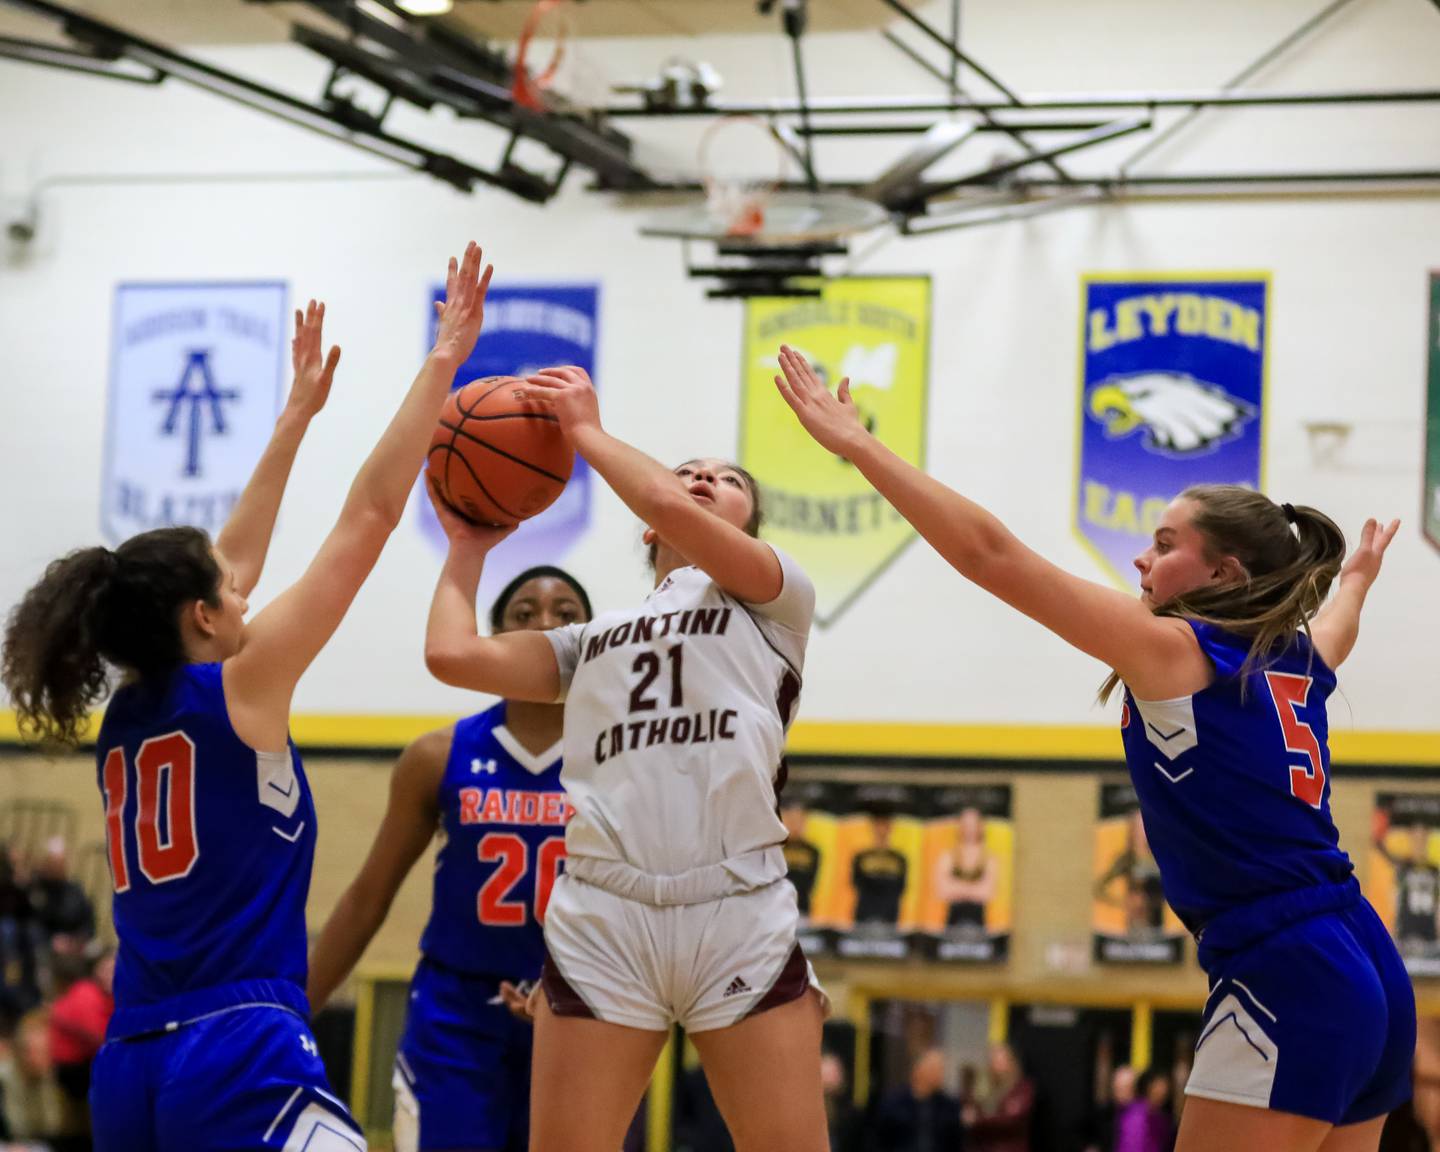 Montini Catholic's Alyssa Epps (21) puts up a shot during Class 3A Hinsdale South Regional final game between Glenbard South at Montini Catholic.  Feb 17, 2023.